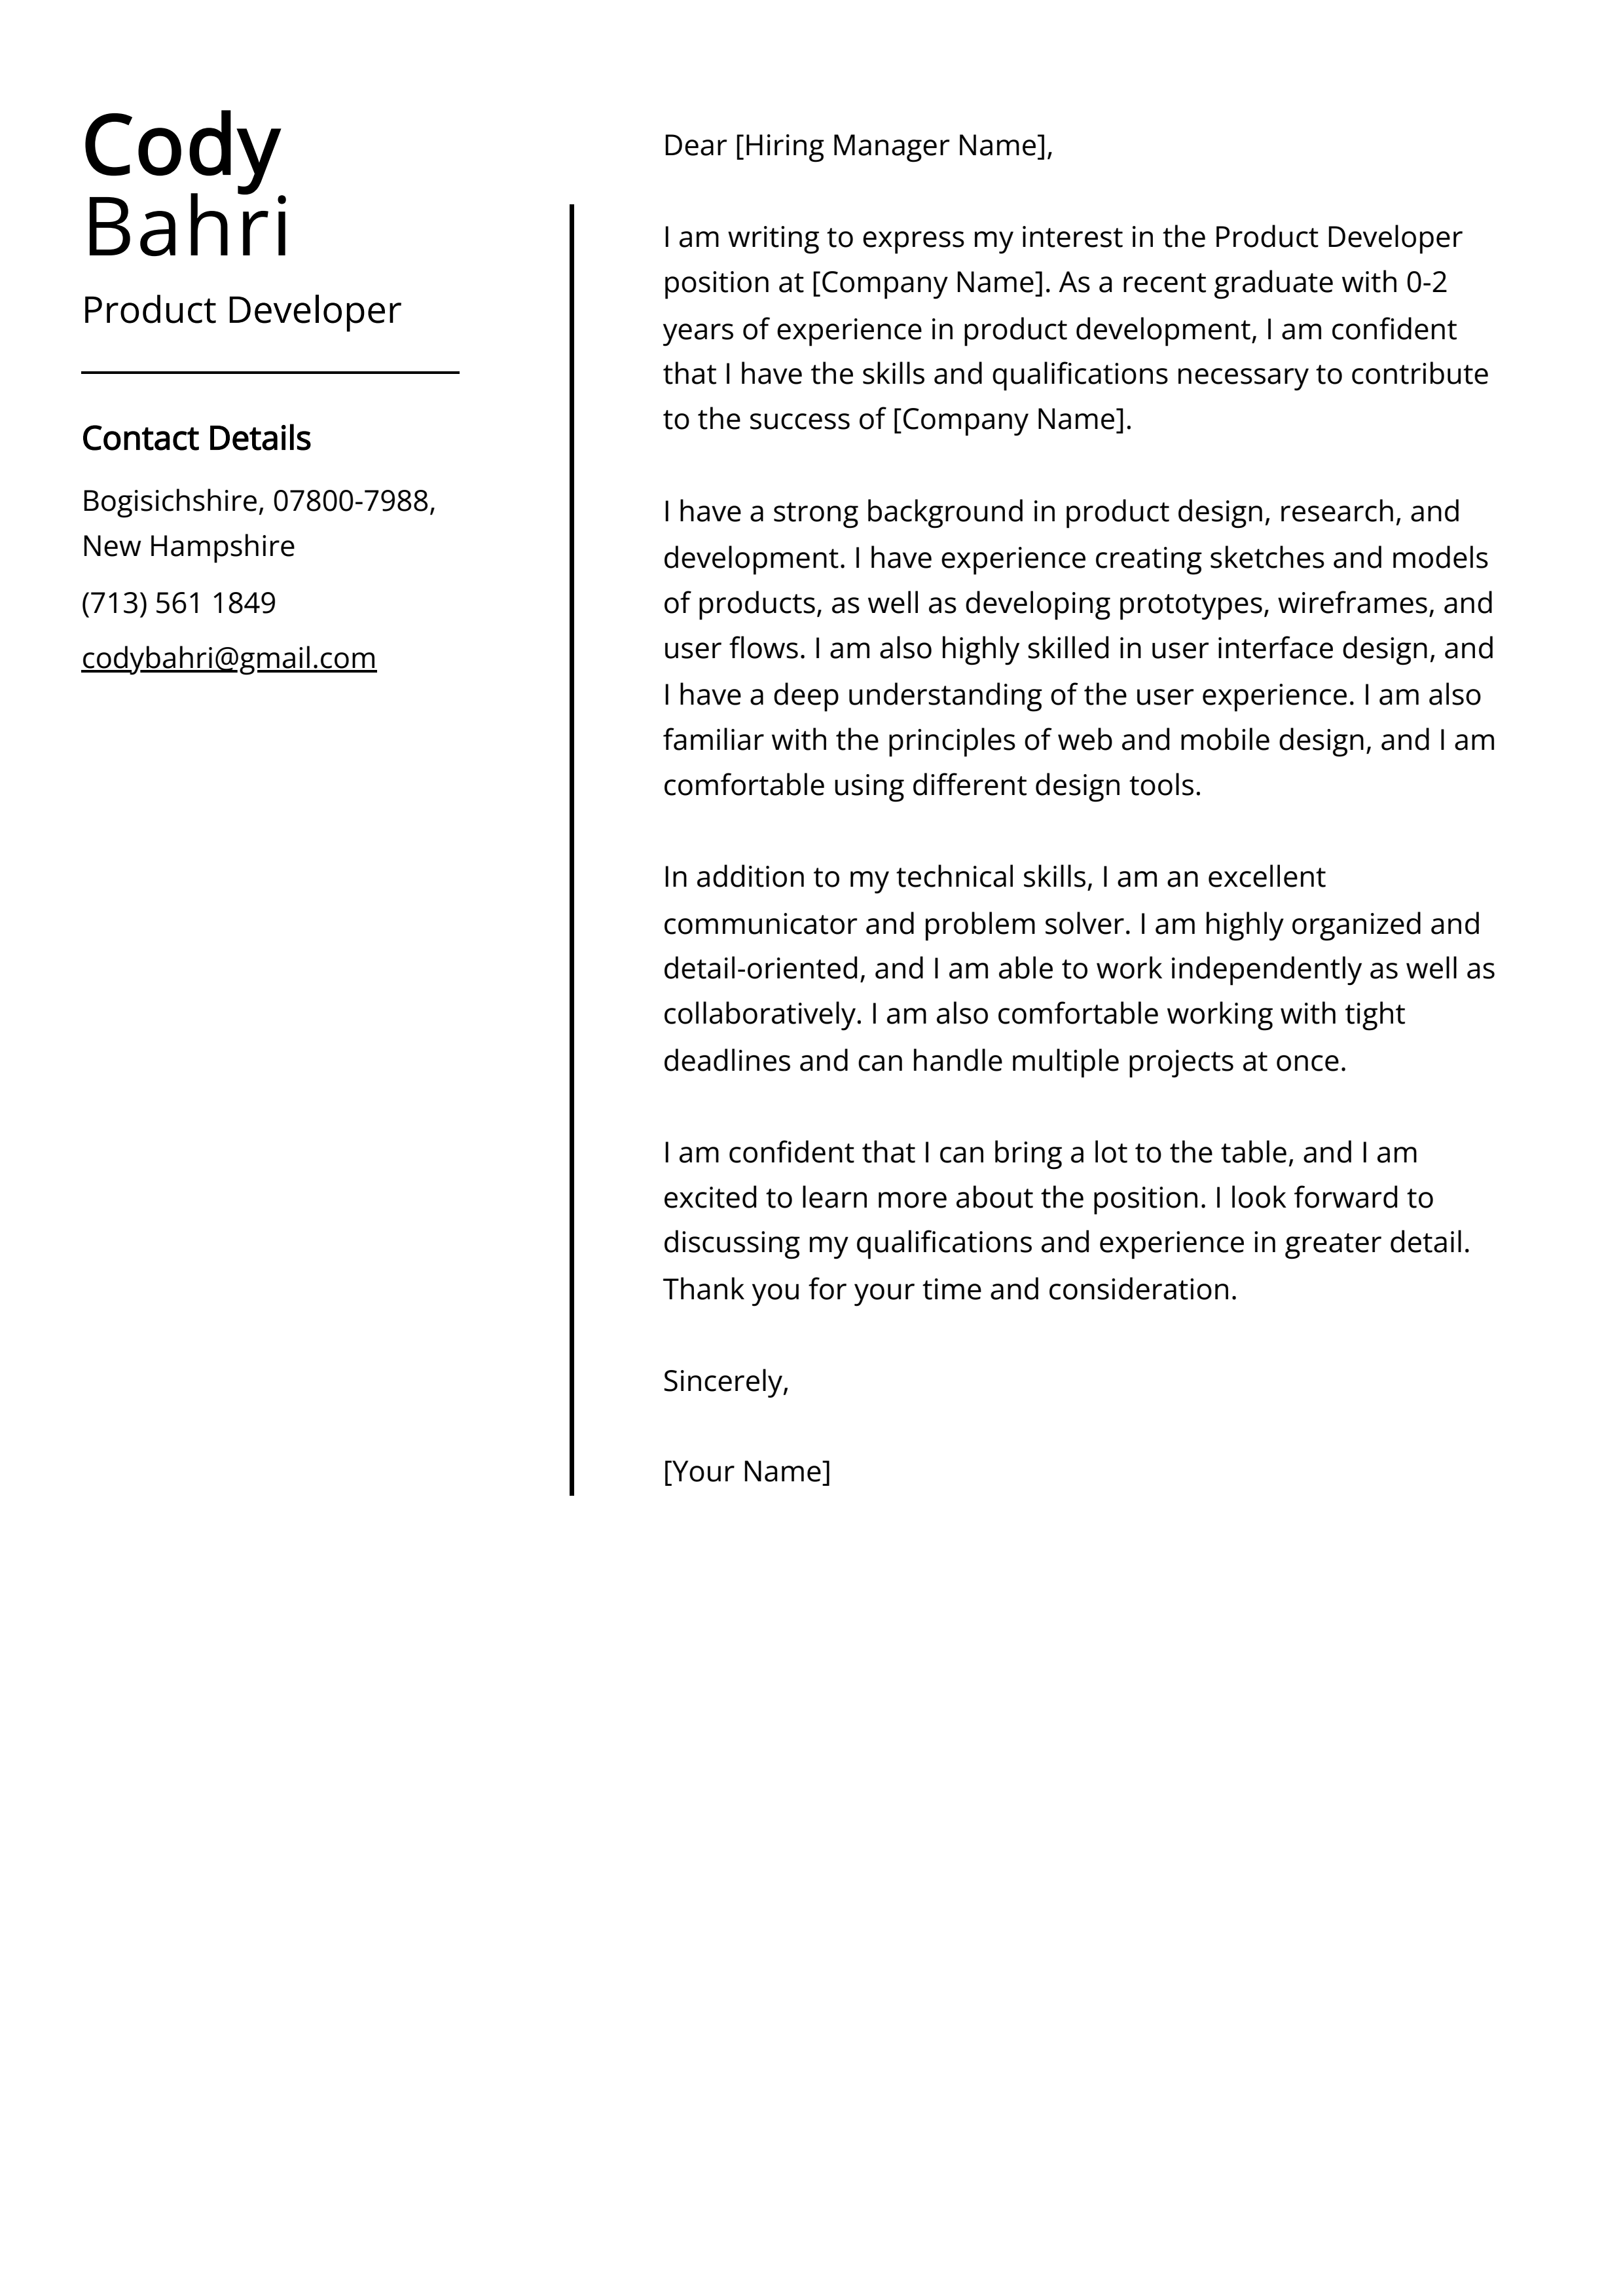 Product Developer Cover Letter Example